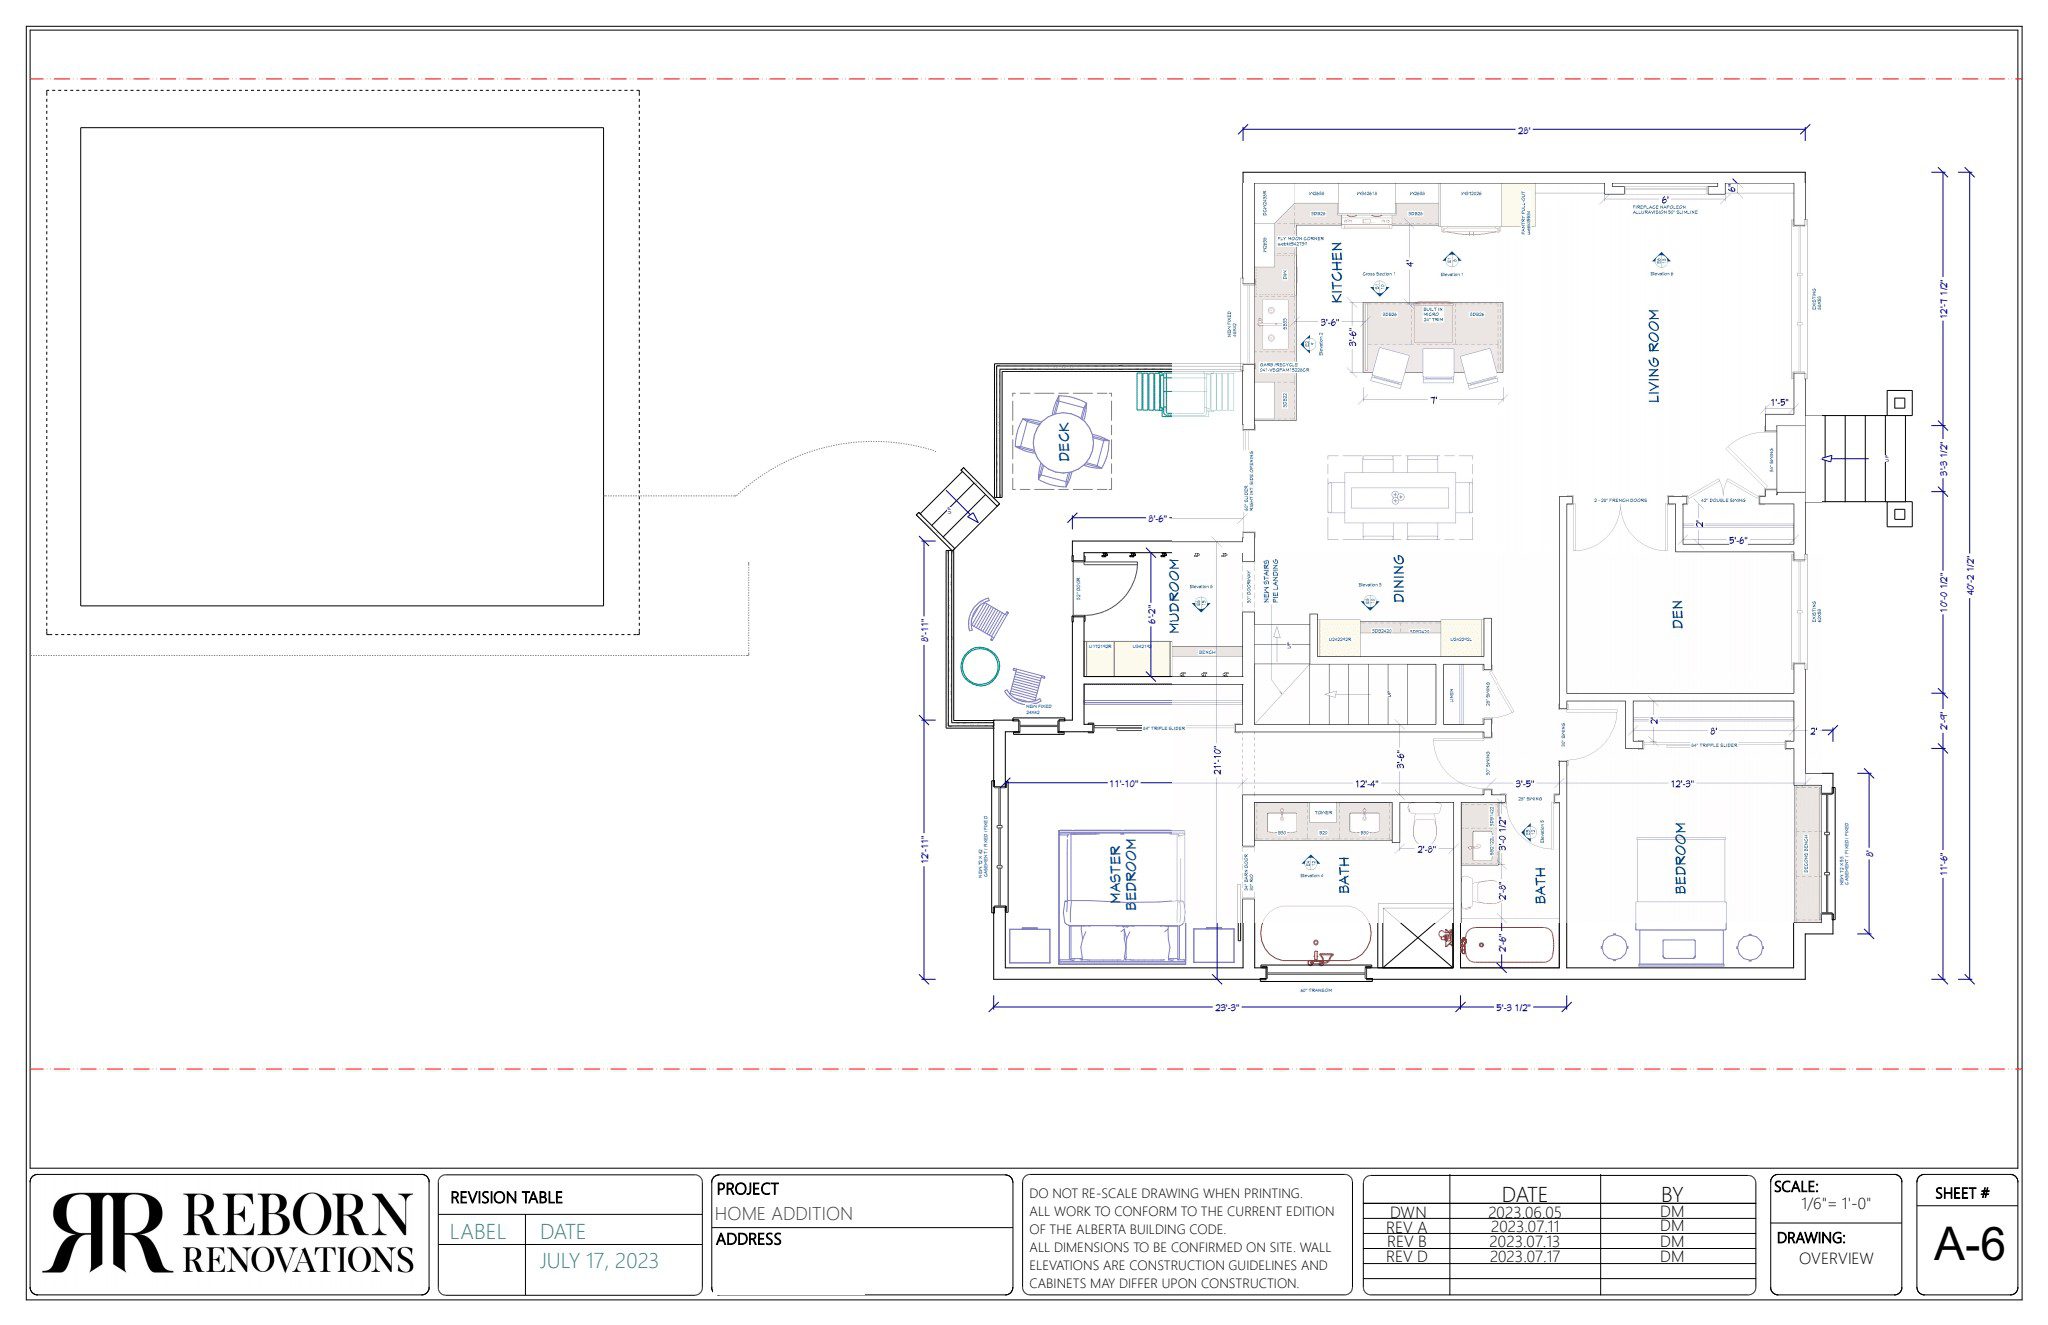 A floor plan for a home with two bedrooms and two bathrooms.